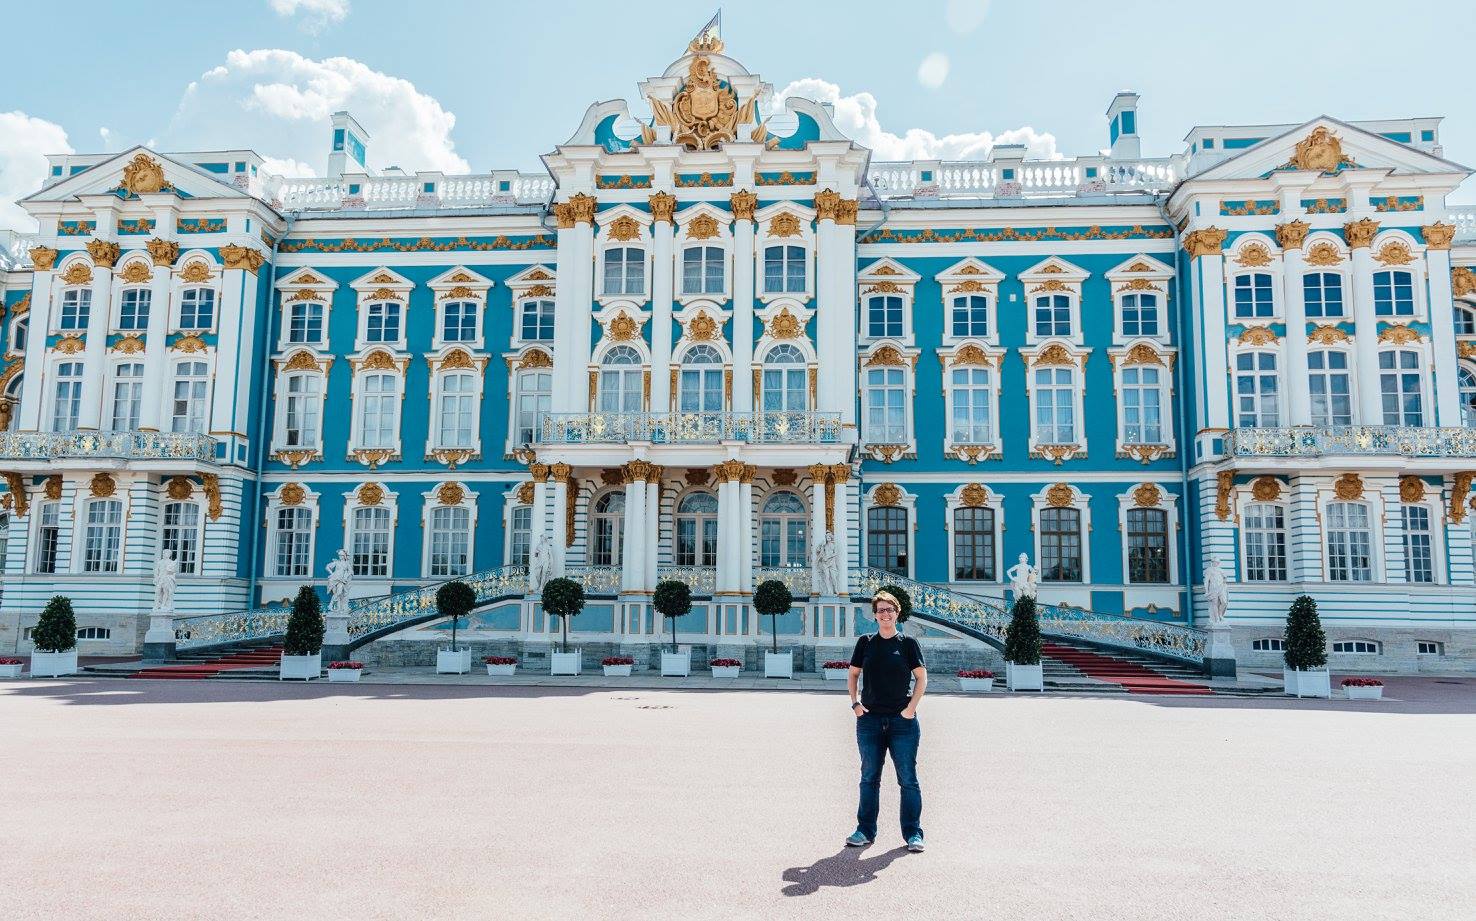 Taryn Peterson at Catherine Palace in St. Petersburg, Russia